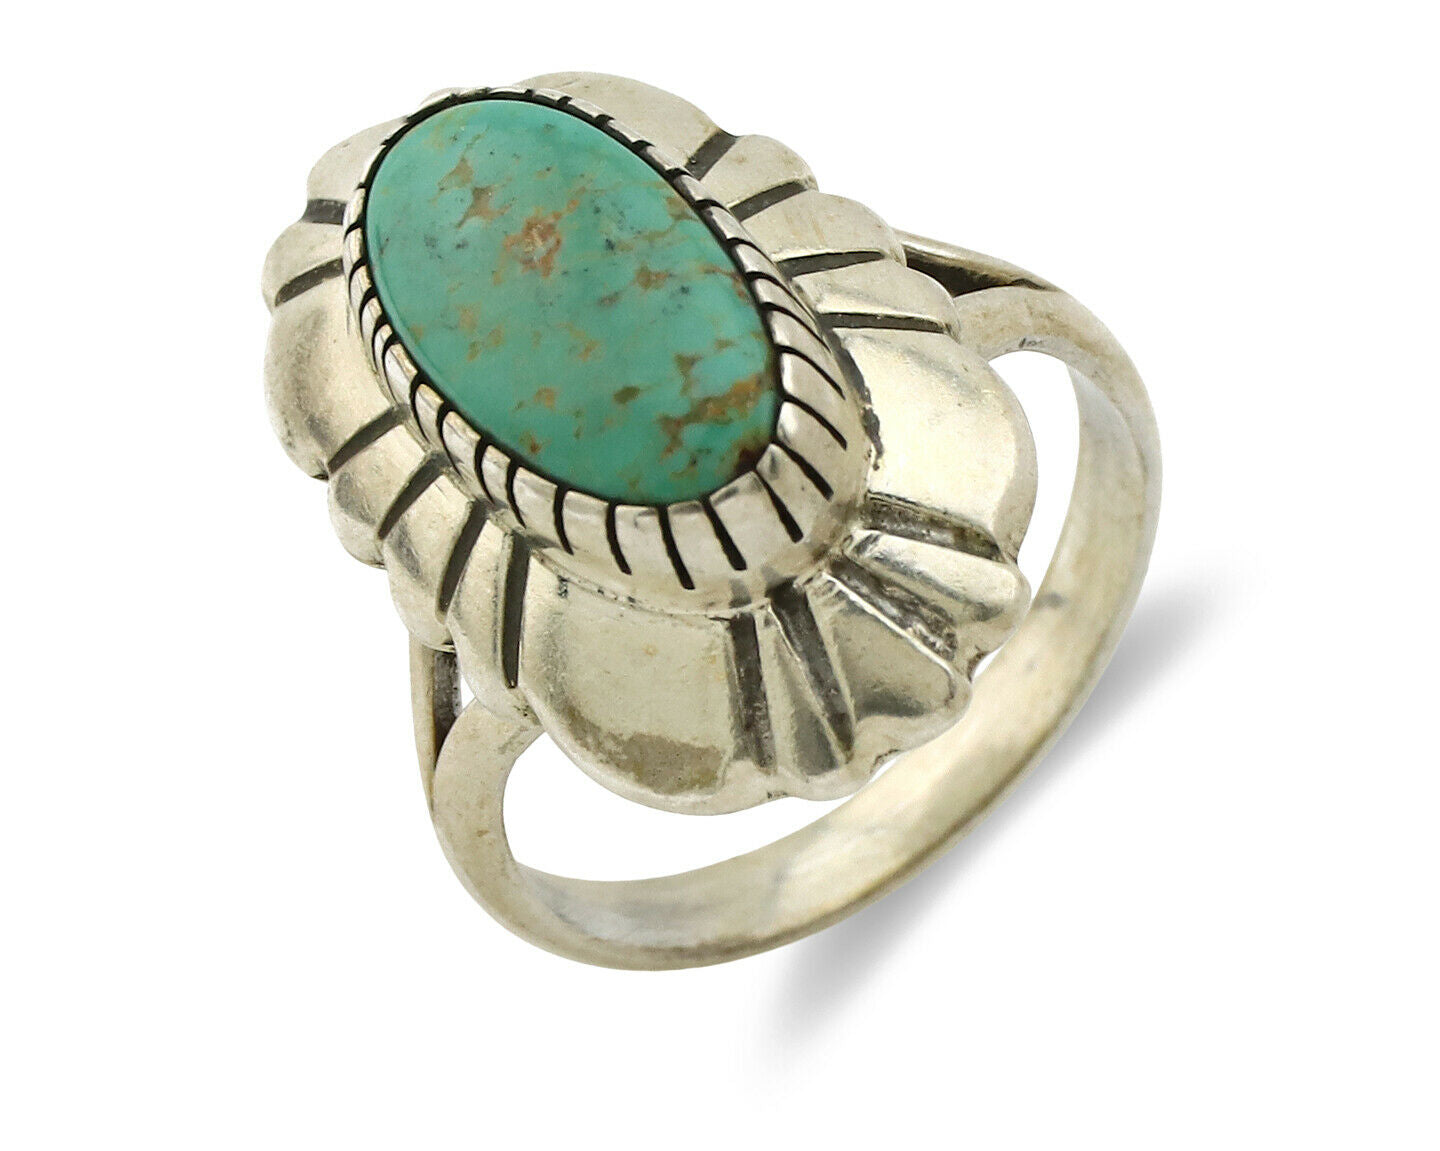 Navajo Ring .925 Silver Green Turquoise Artist Signed M Montoya C.80's